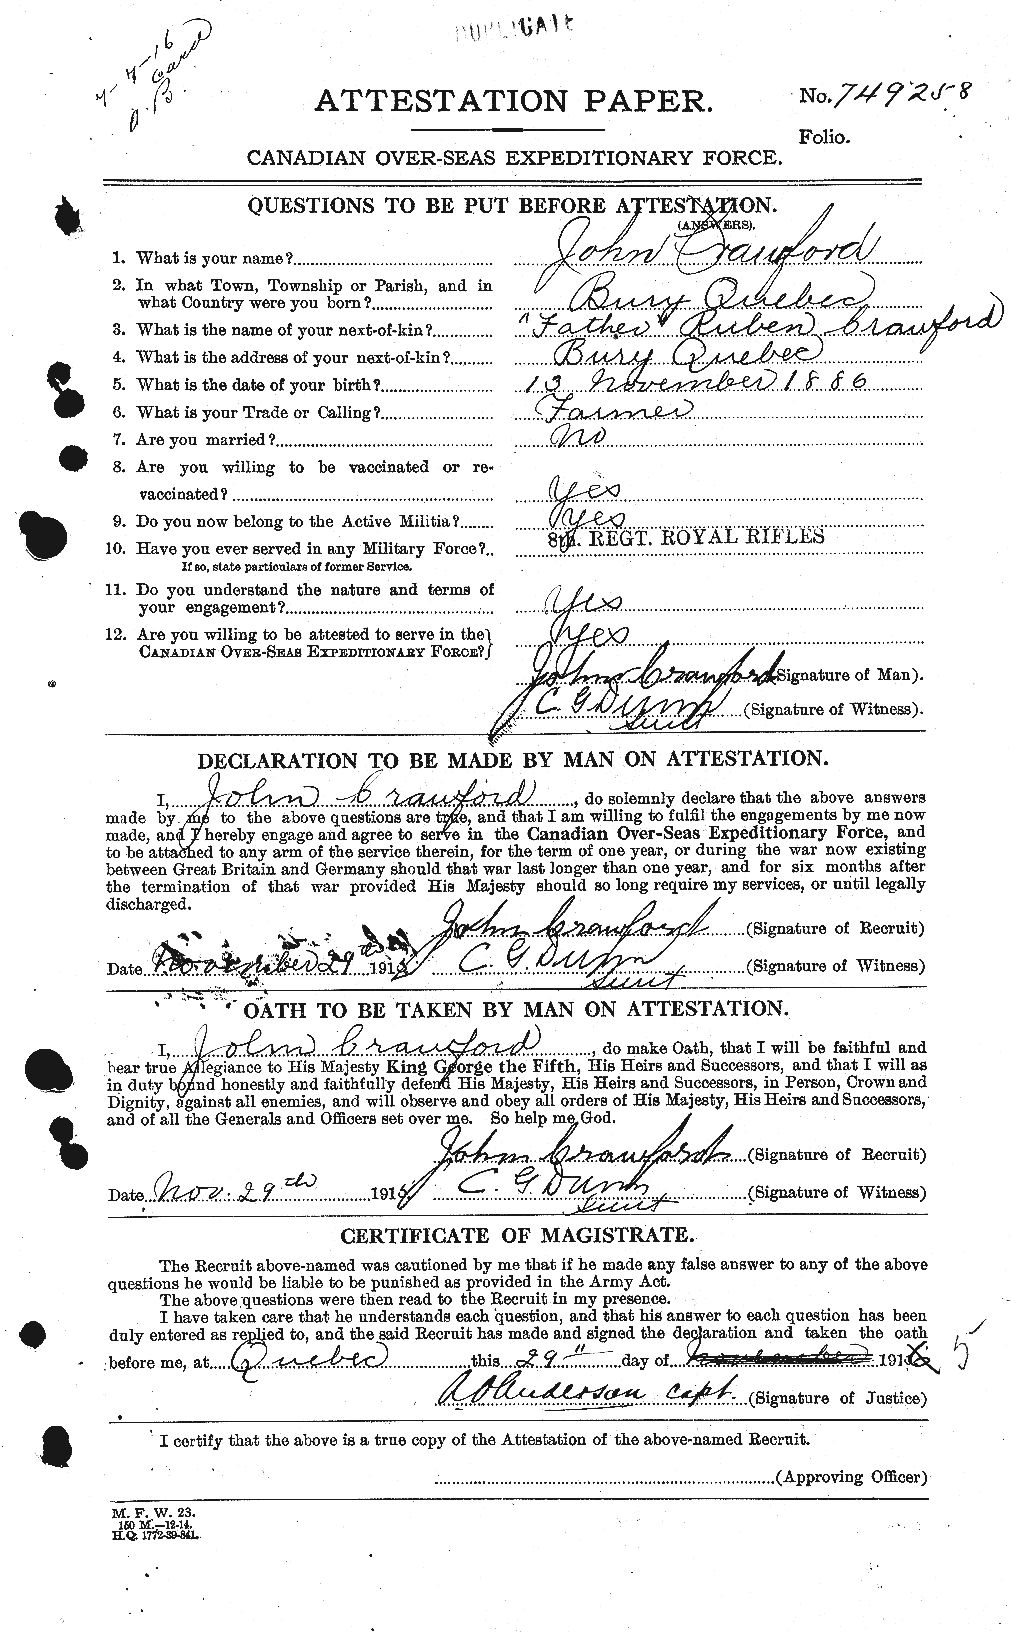 Personnel Records of the First World War - CEF 062455a